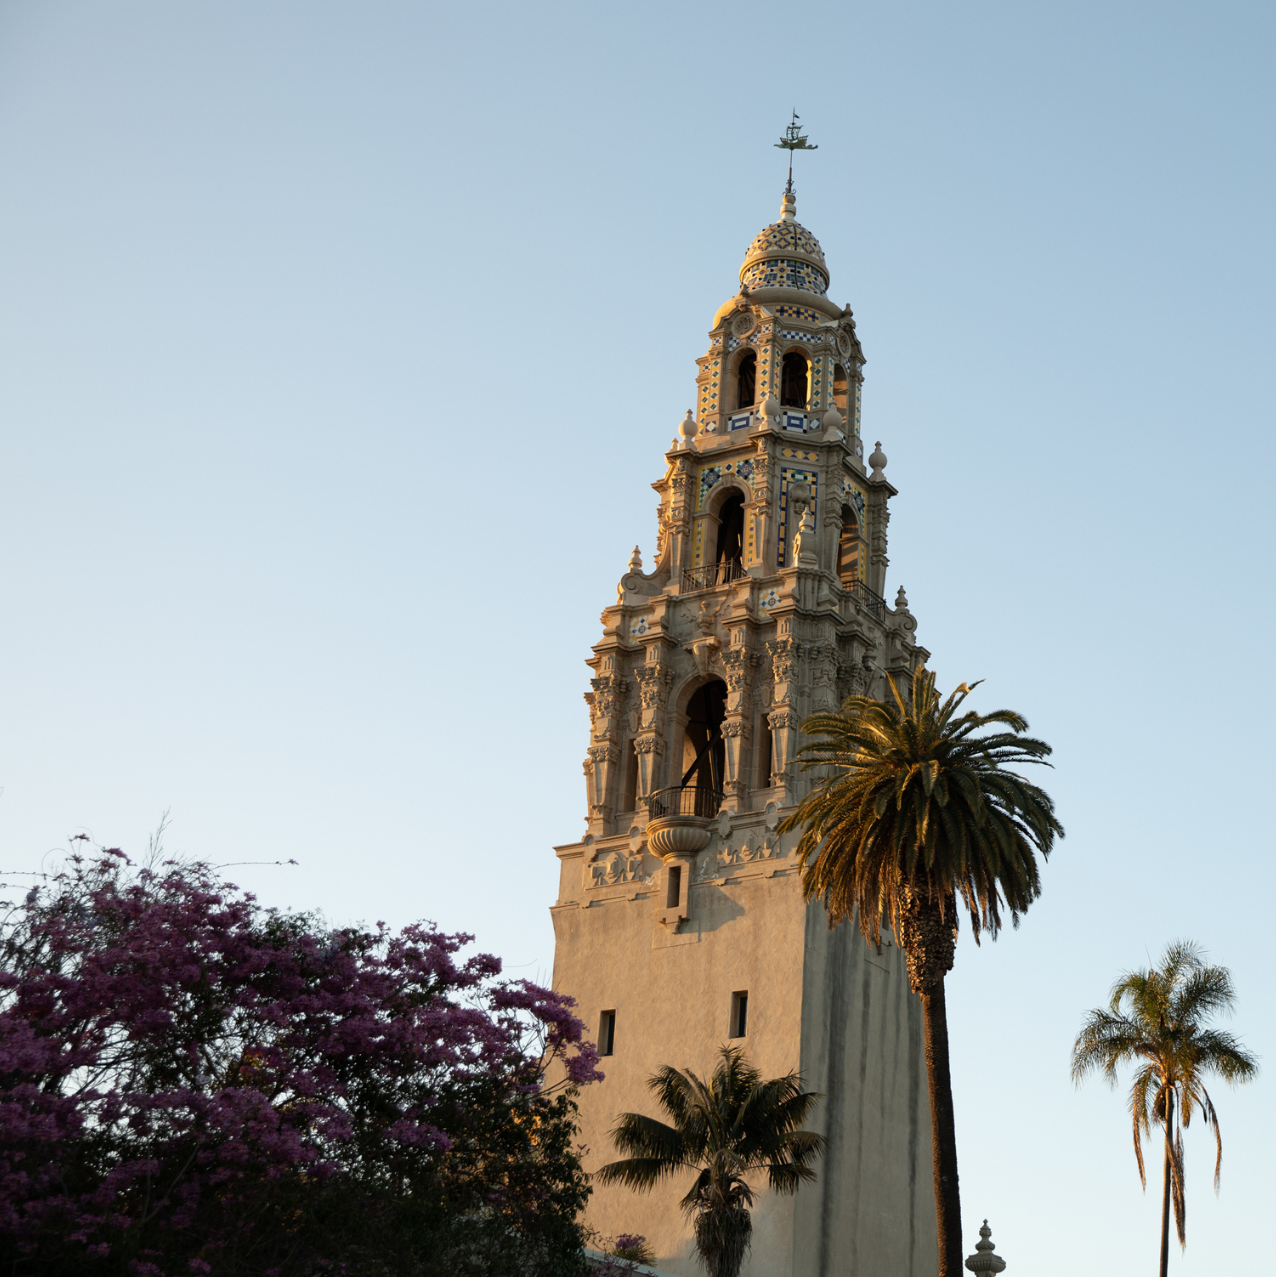 View of California Tower in the early evening, with palm trees in the foreground.